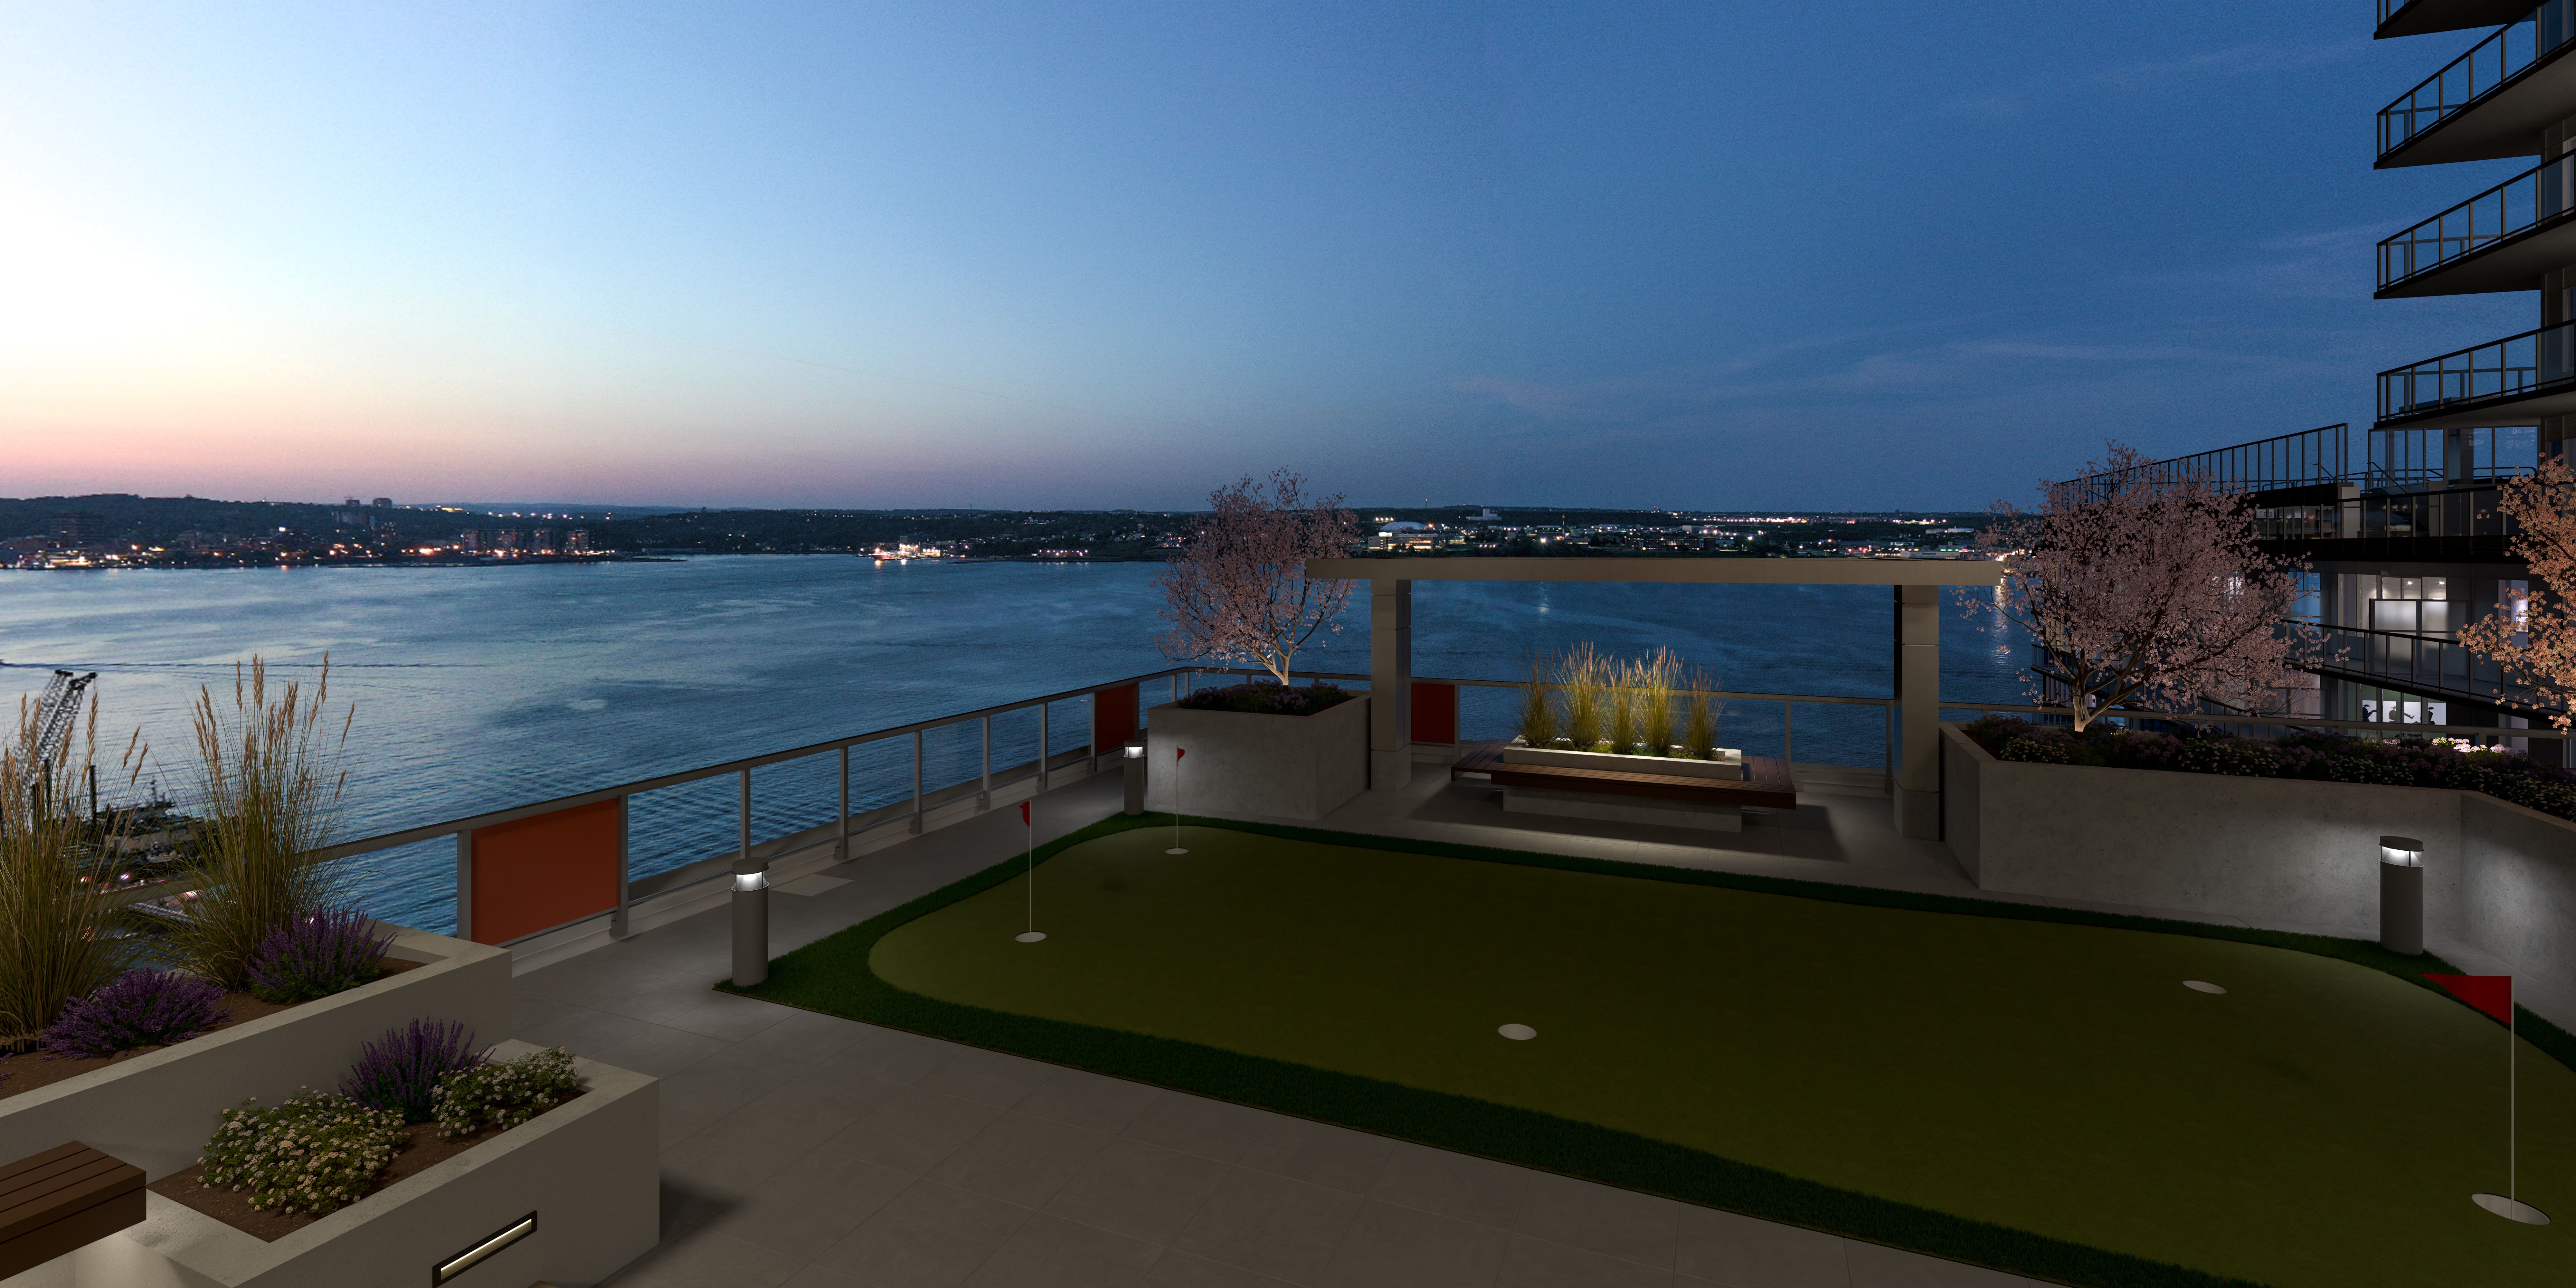 Cunard's 11th-floor terrace: Outdoor fireplace, putting green, and BBQ stations for leisure and relaxation.